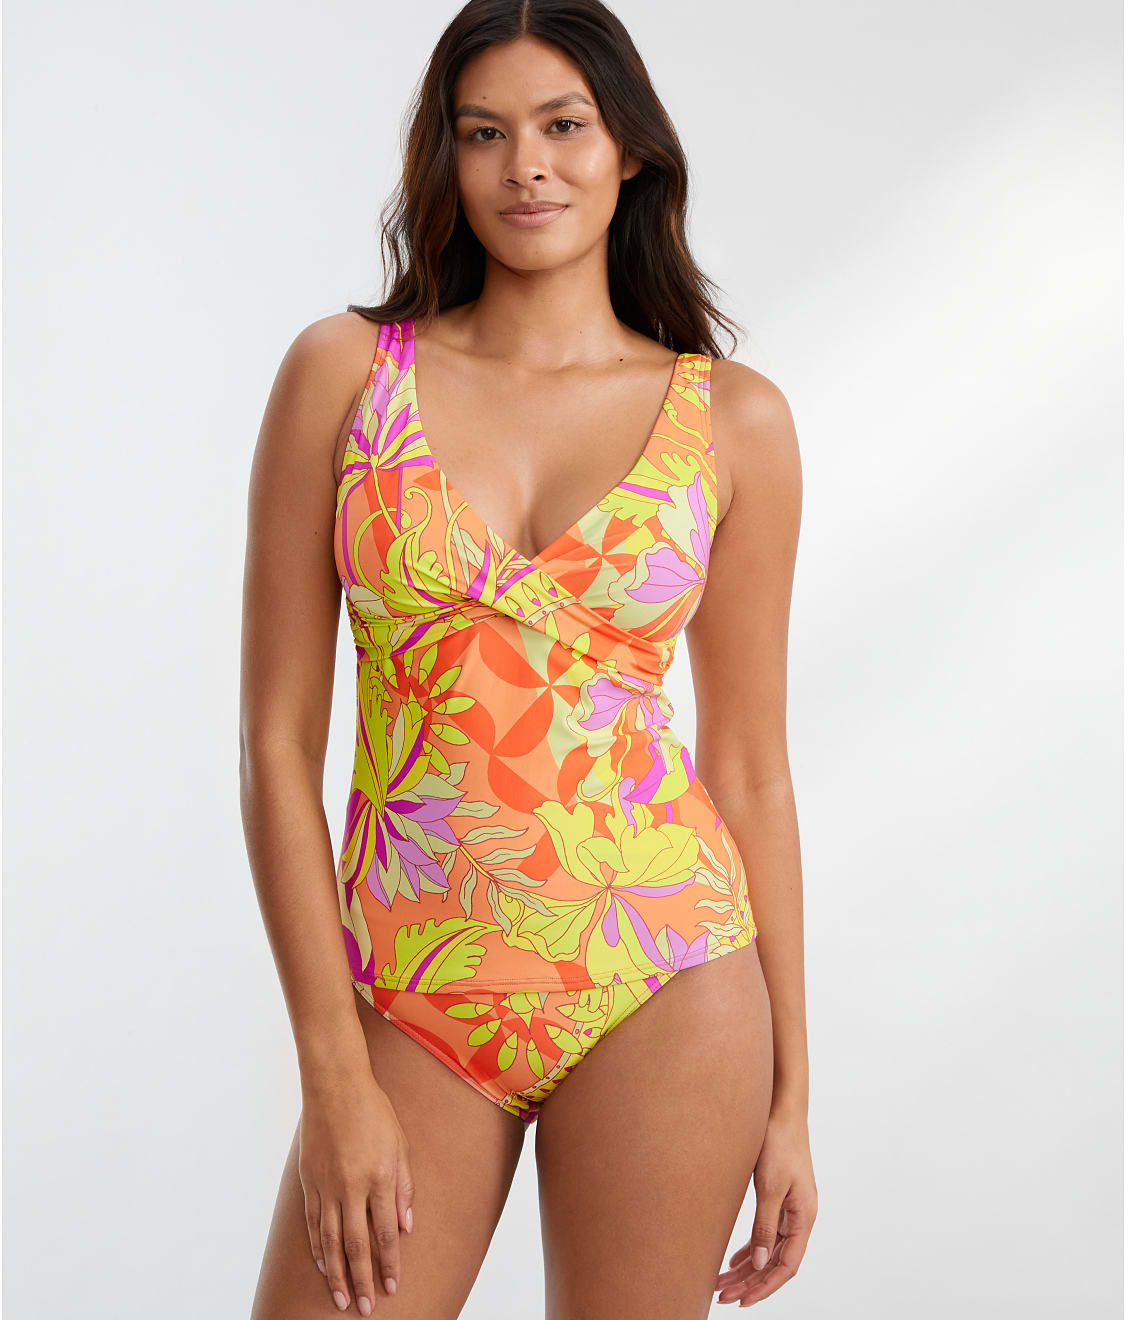 Sunsets: Palace Garden Elsie Underwire Wrap Tankini Top 738D-PALAC